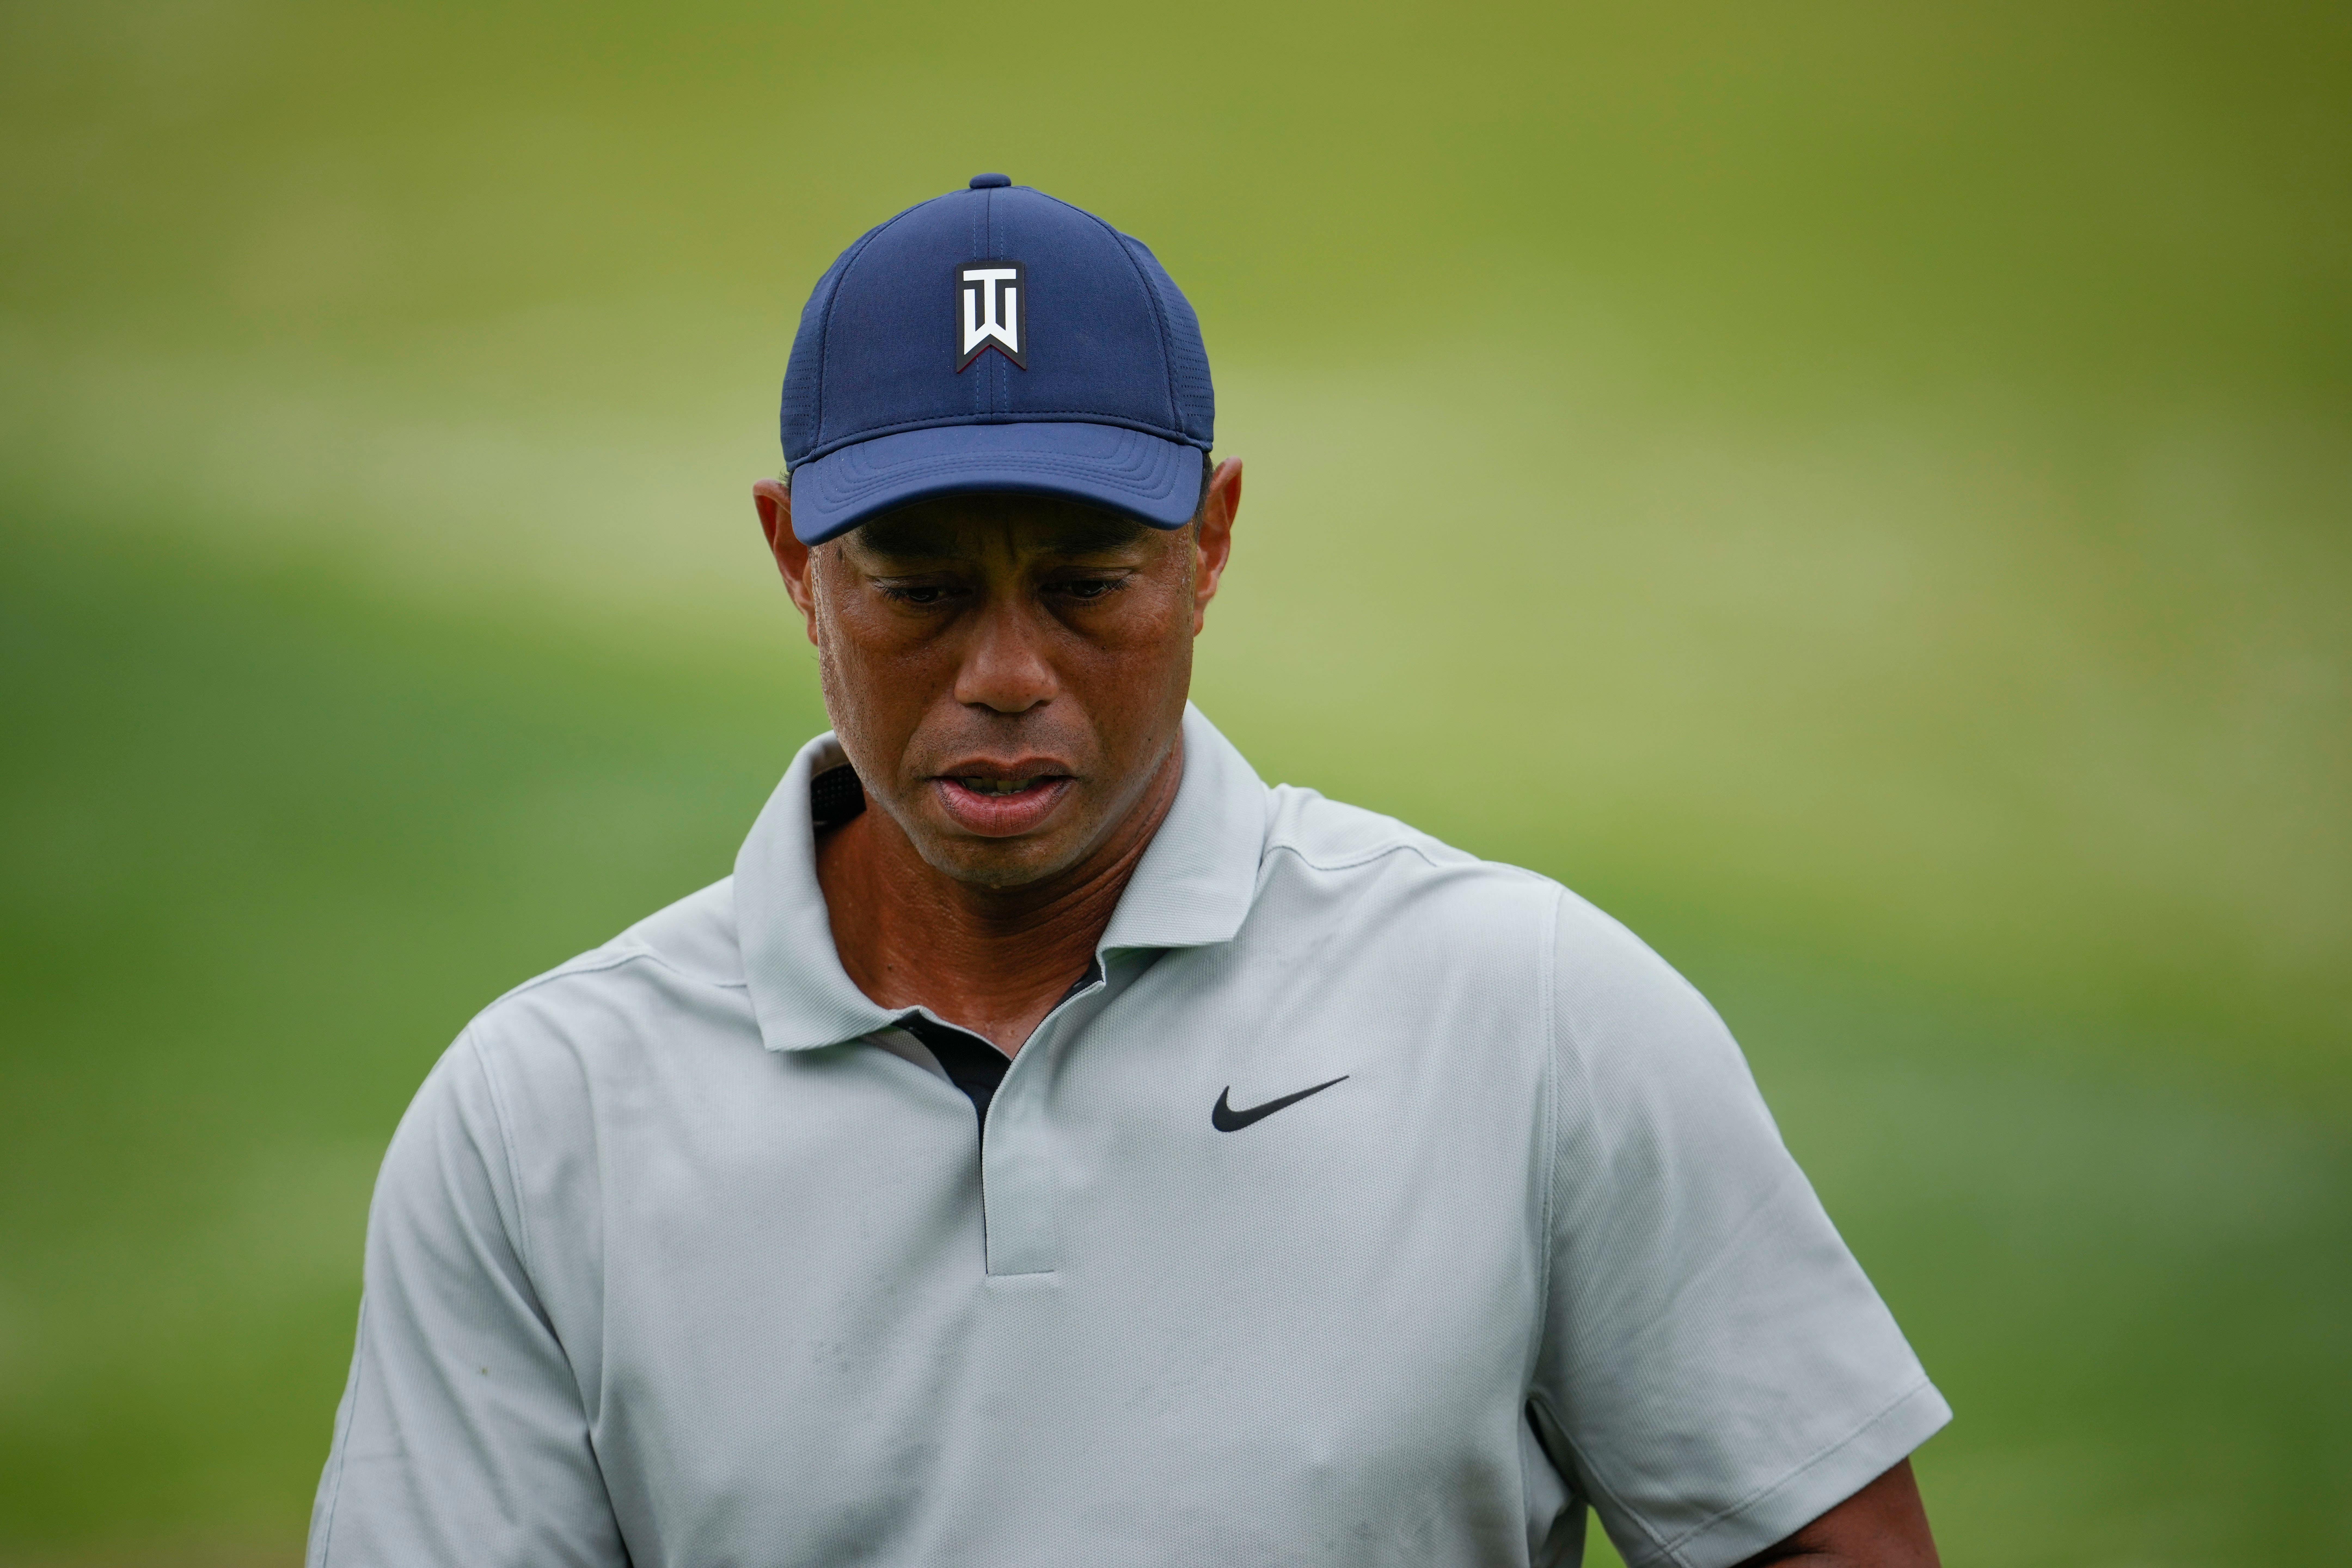 Tiger Woods will make his 25th appearance in the Masters this week (Matt Slocum/AP)